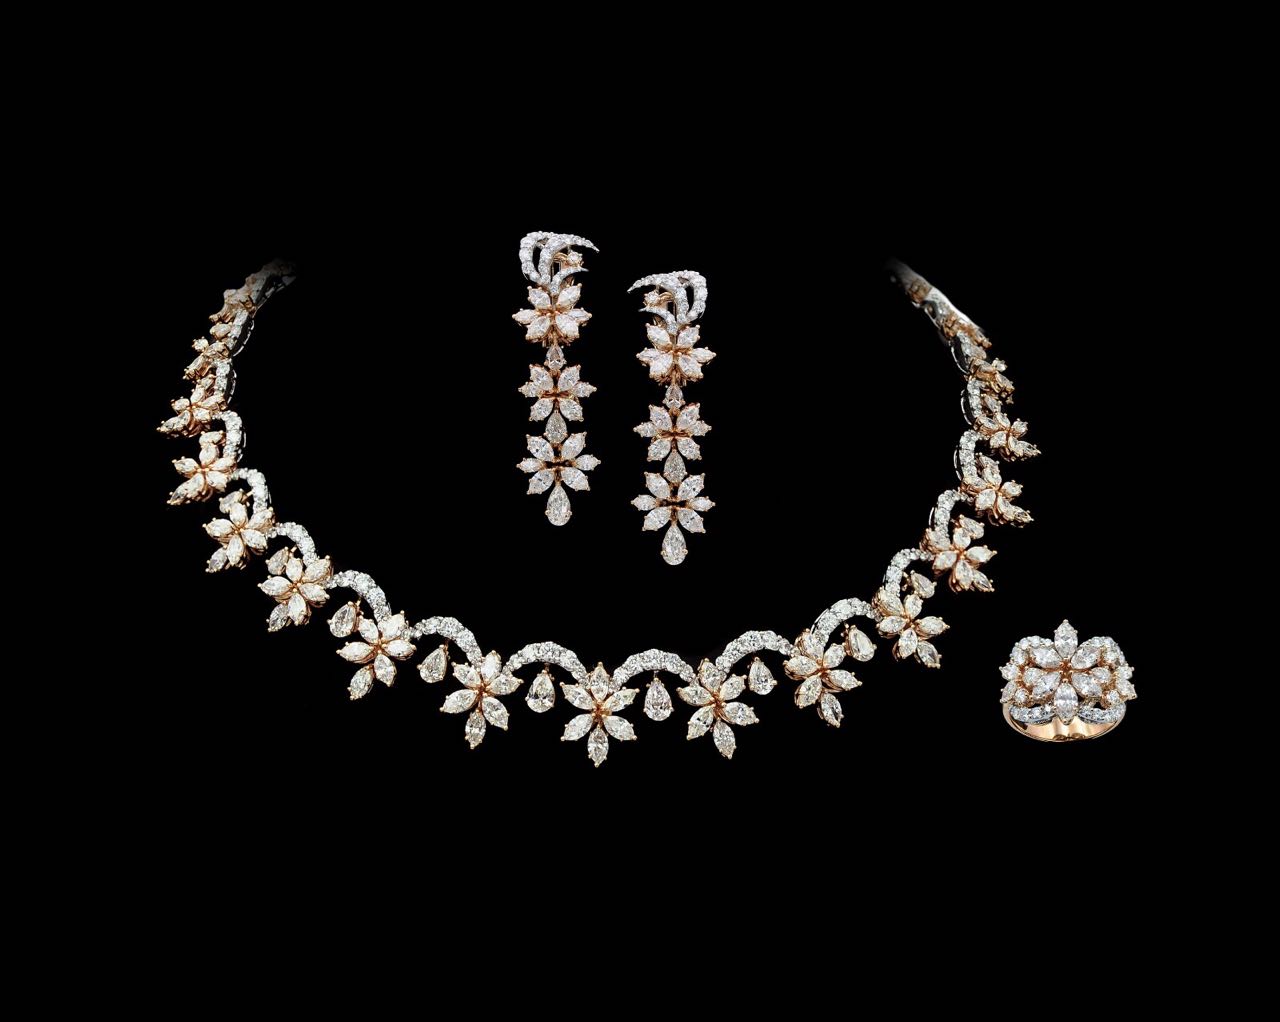 Diamond necklace, earrings and ring set